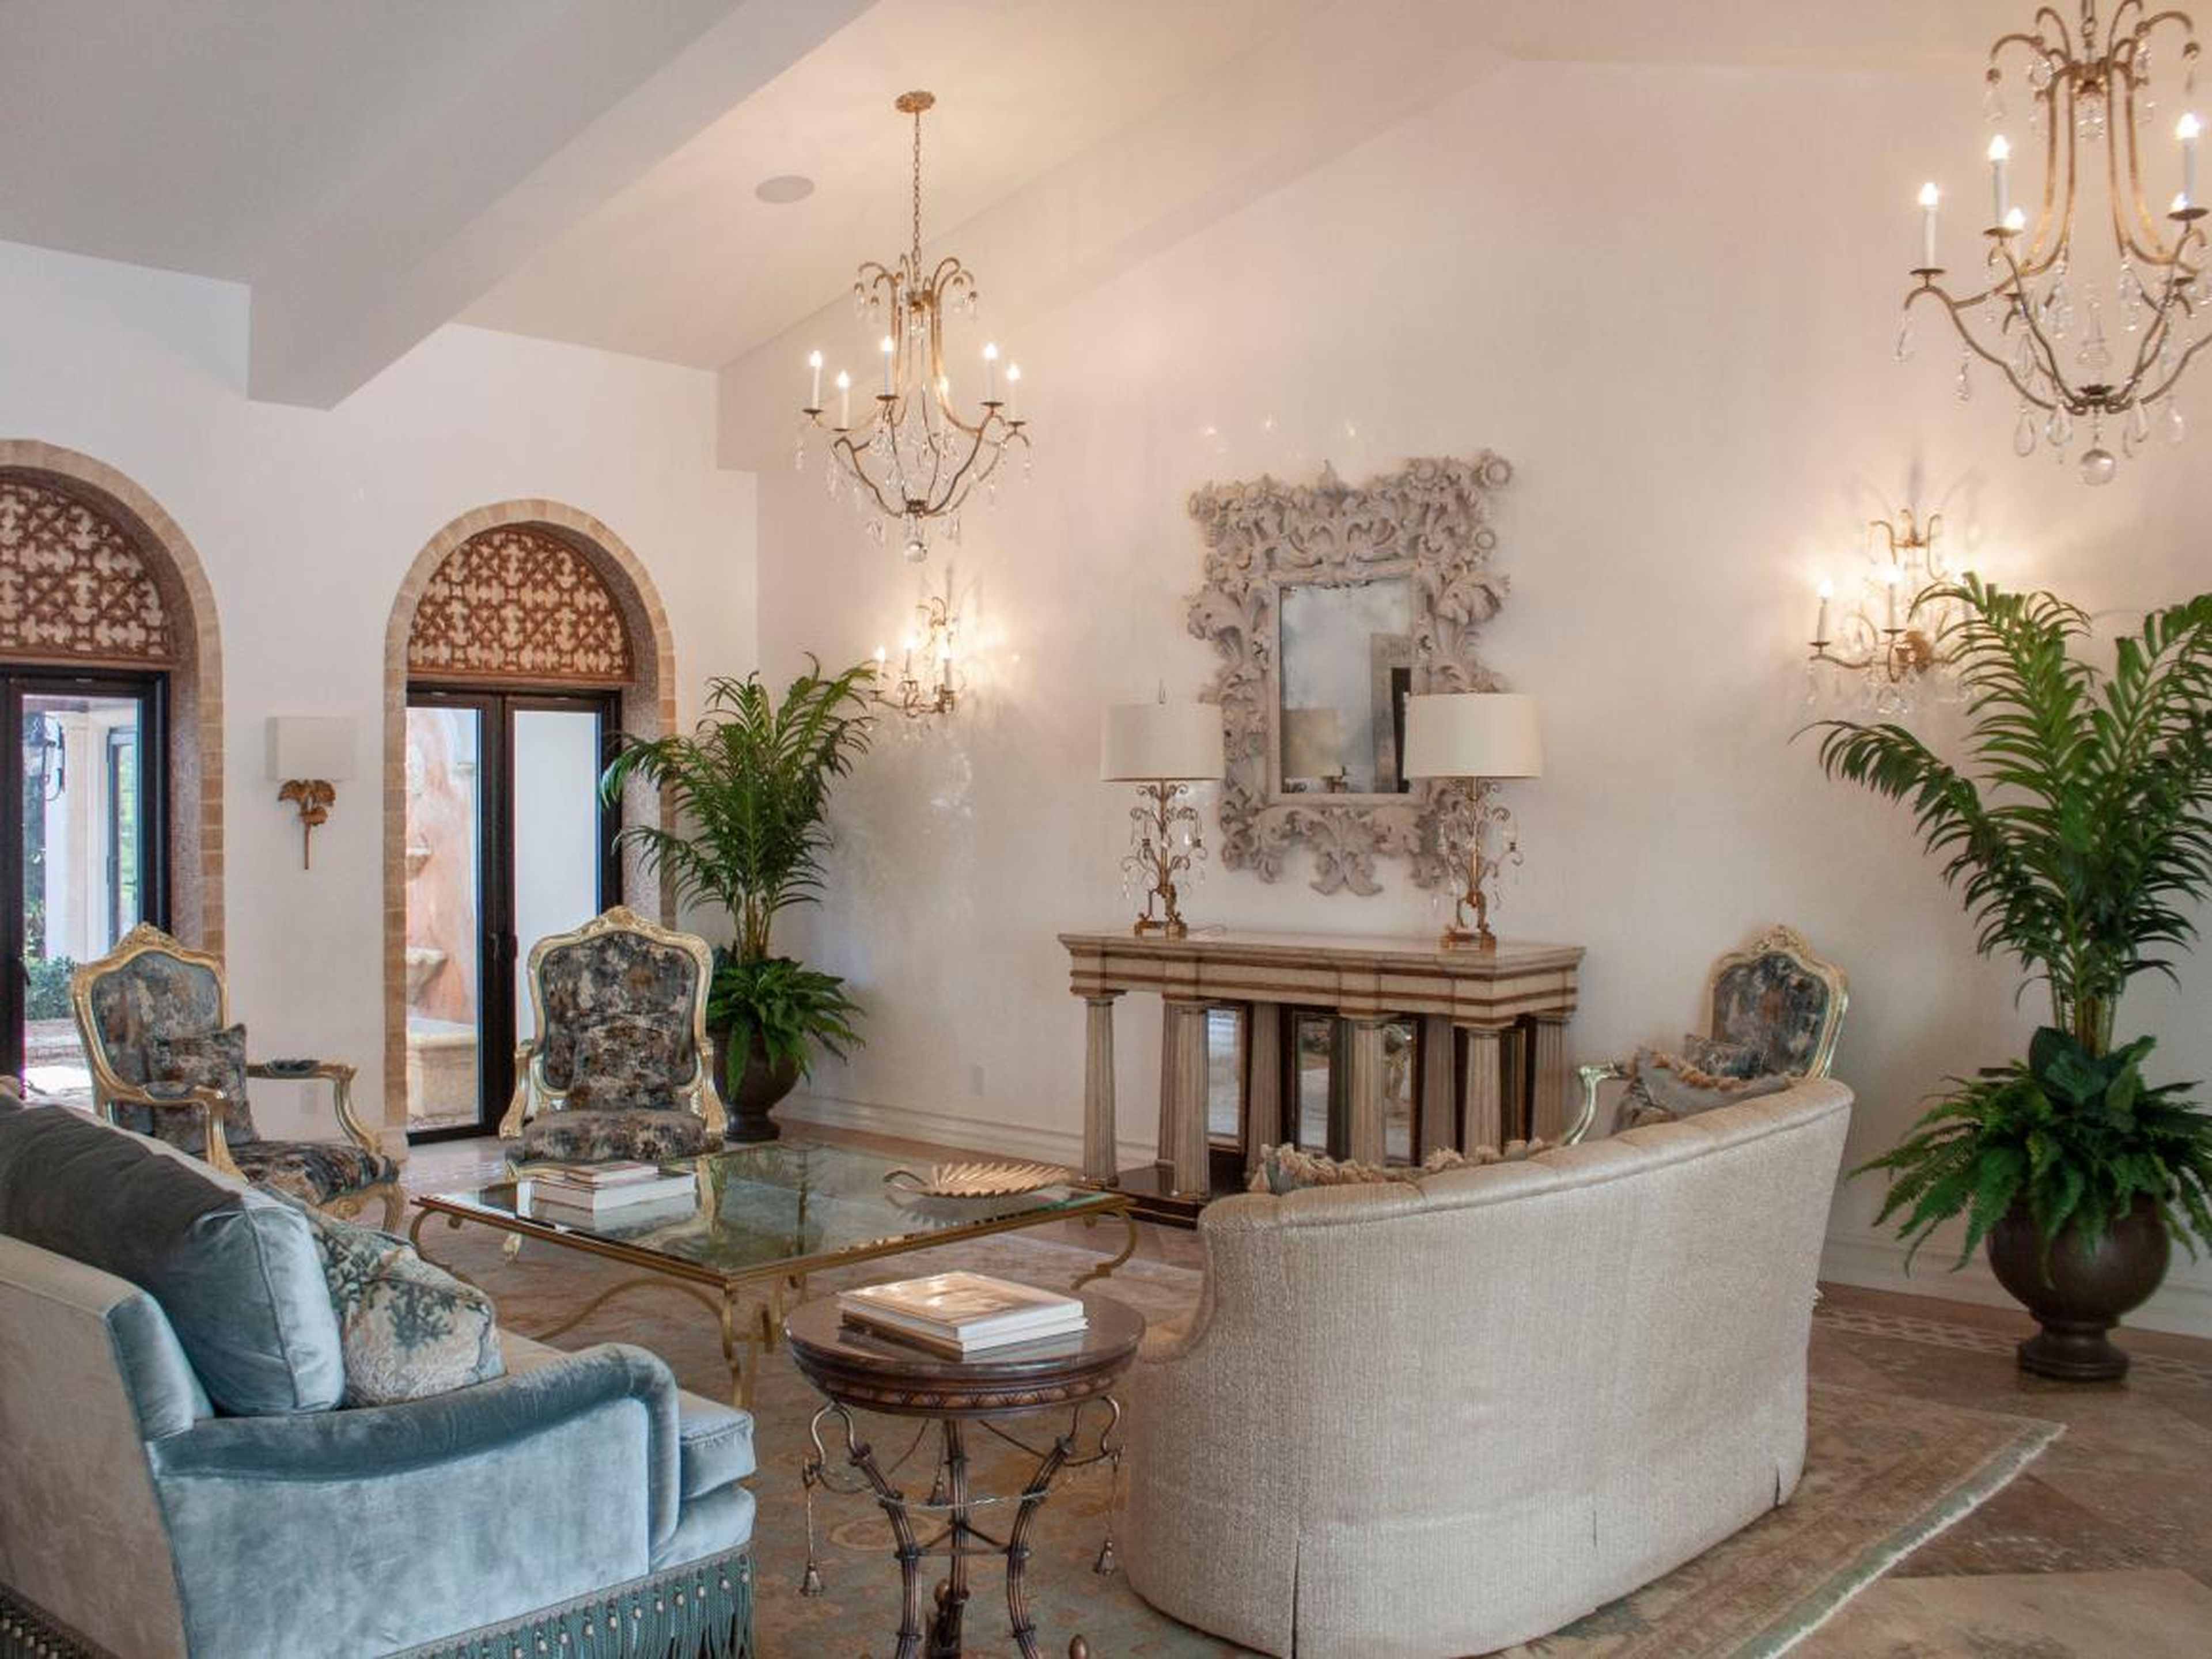 The home is opulently decorated, with high ceilings and chandeliers.